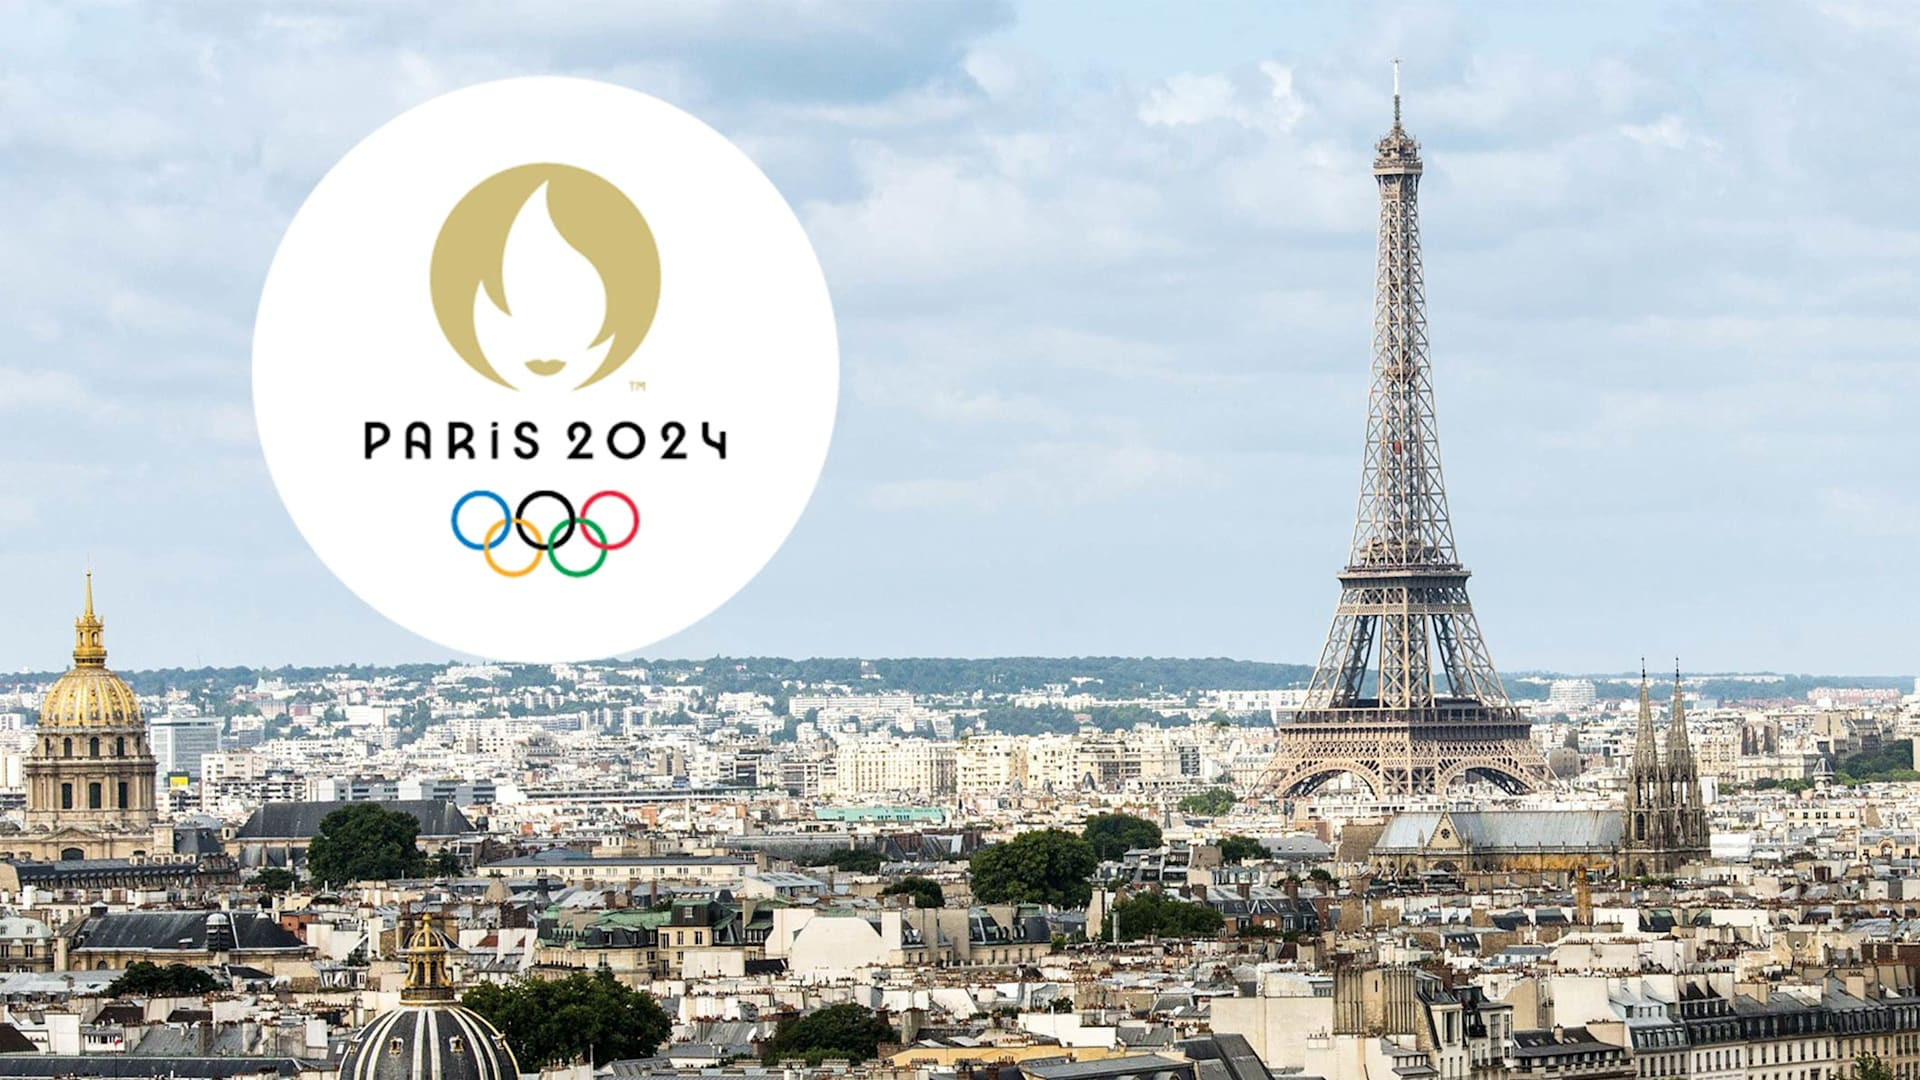 Paris 2024 to sell half of 13.4 million tickets at budget price via central platform designed to end uncertainty